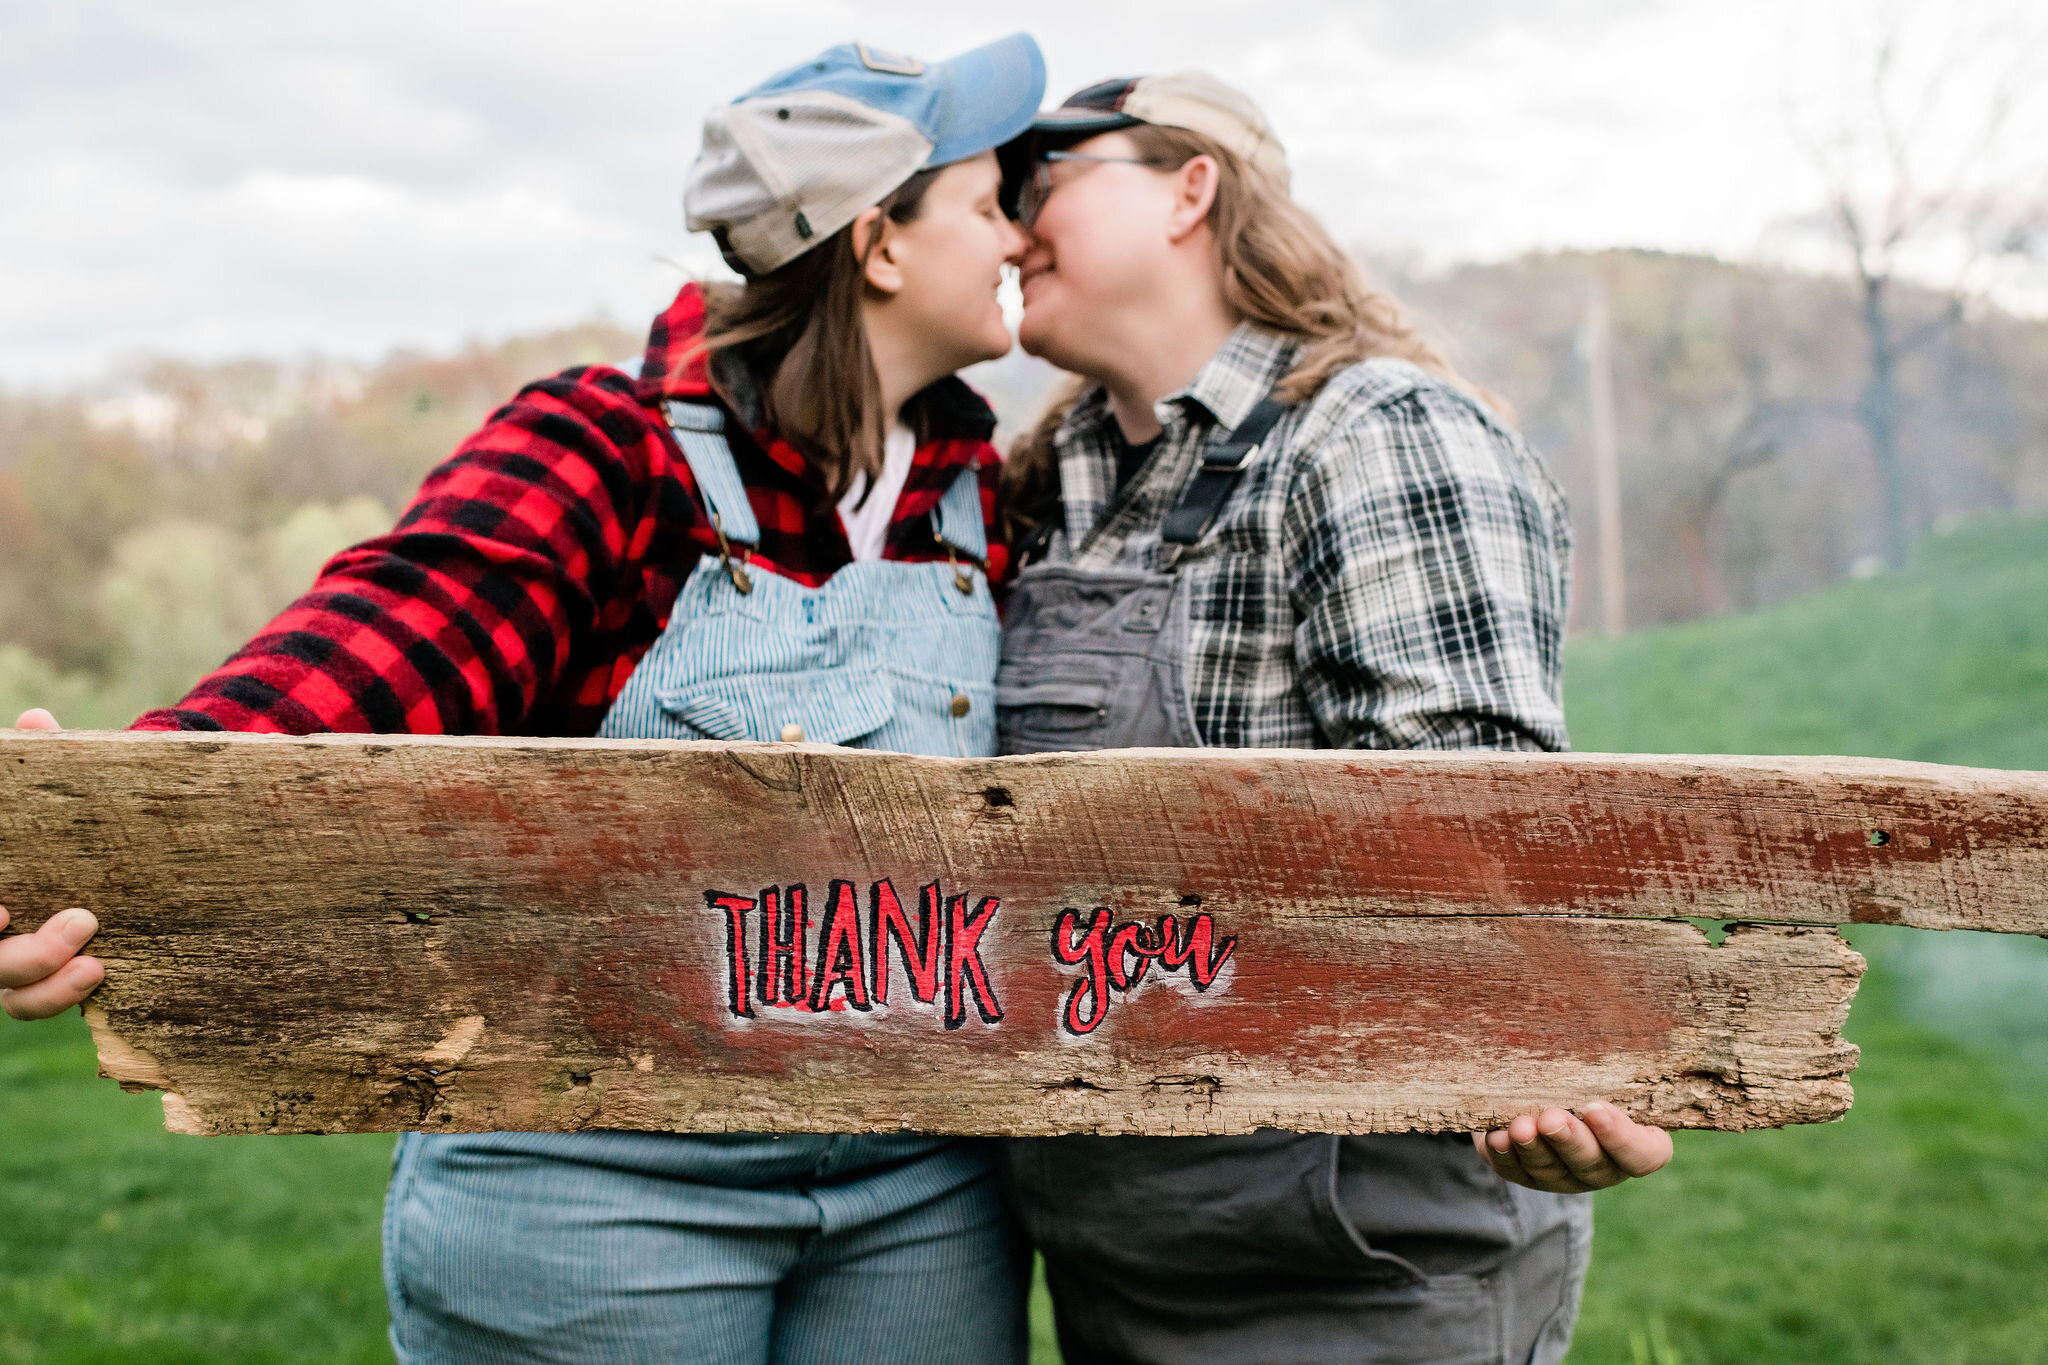 Women kissing behind a thank you sign they are holding